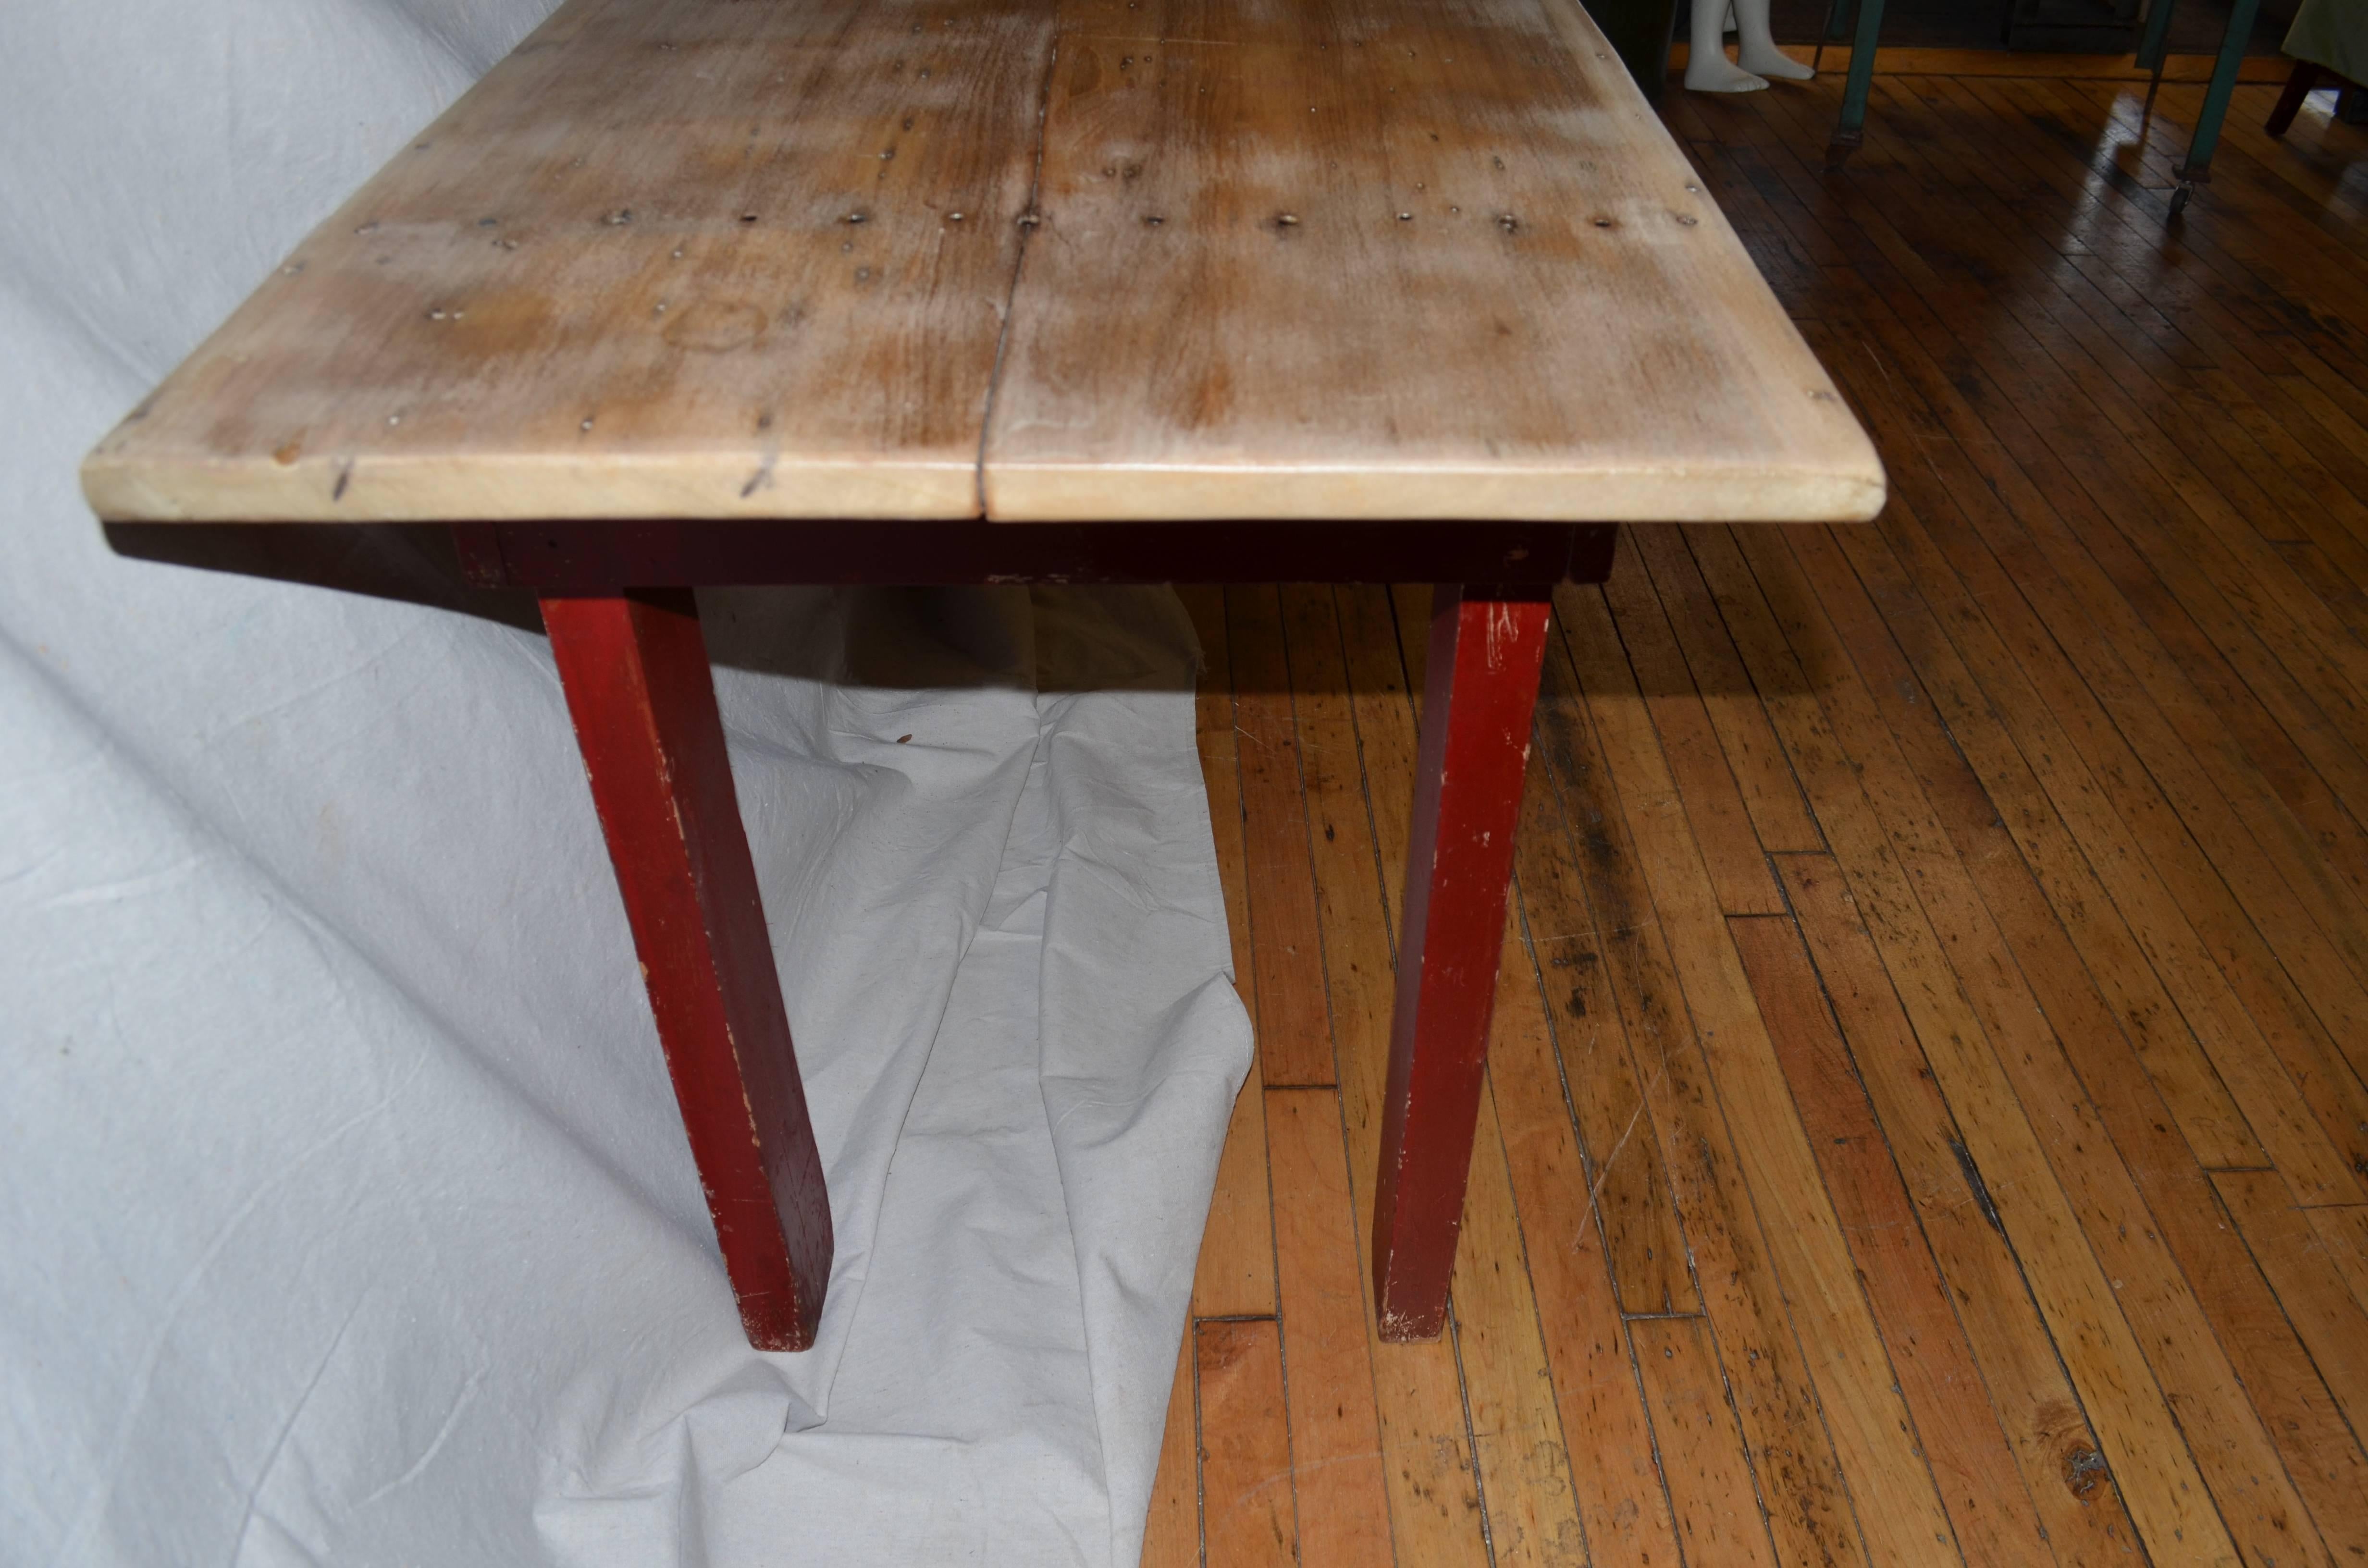 20th Century Farm Table with Single Board Top, Red Legs and Stringer Boards